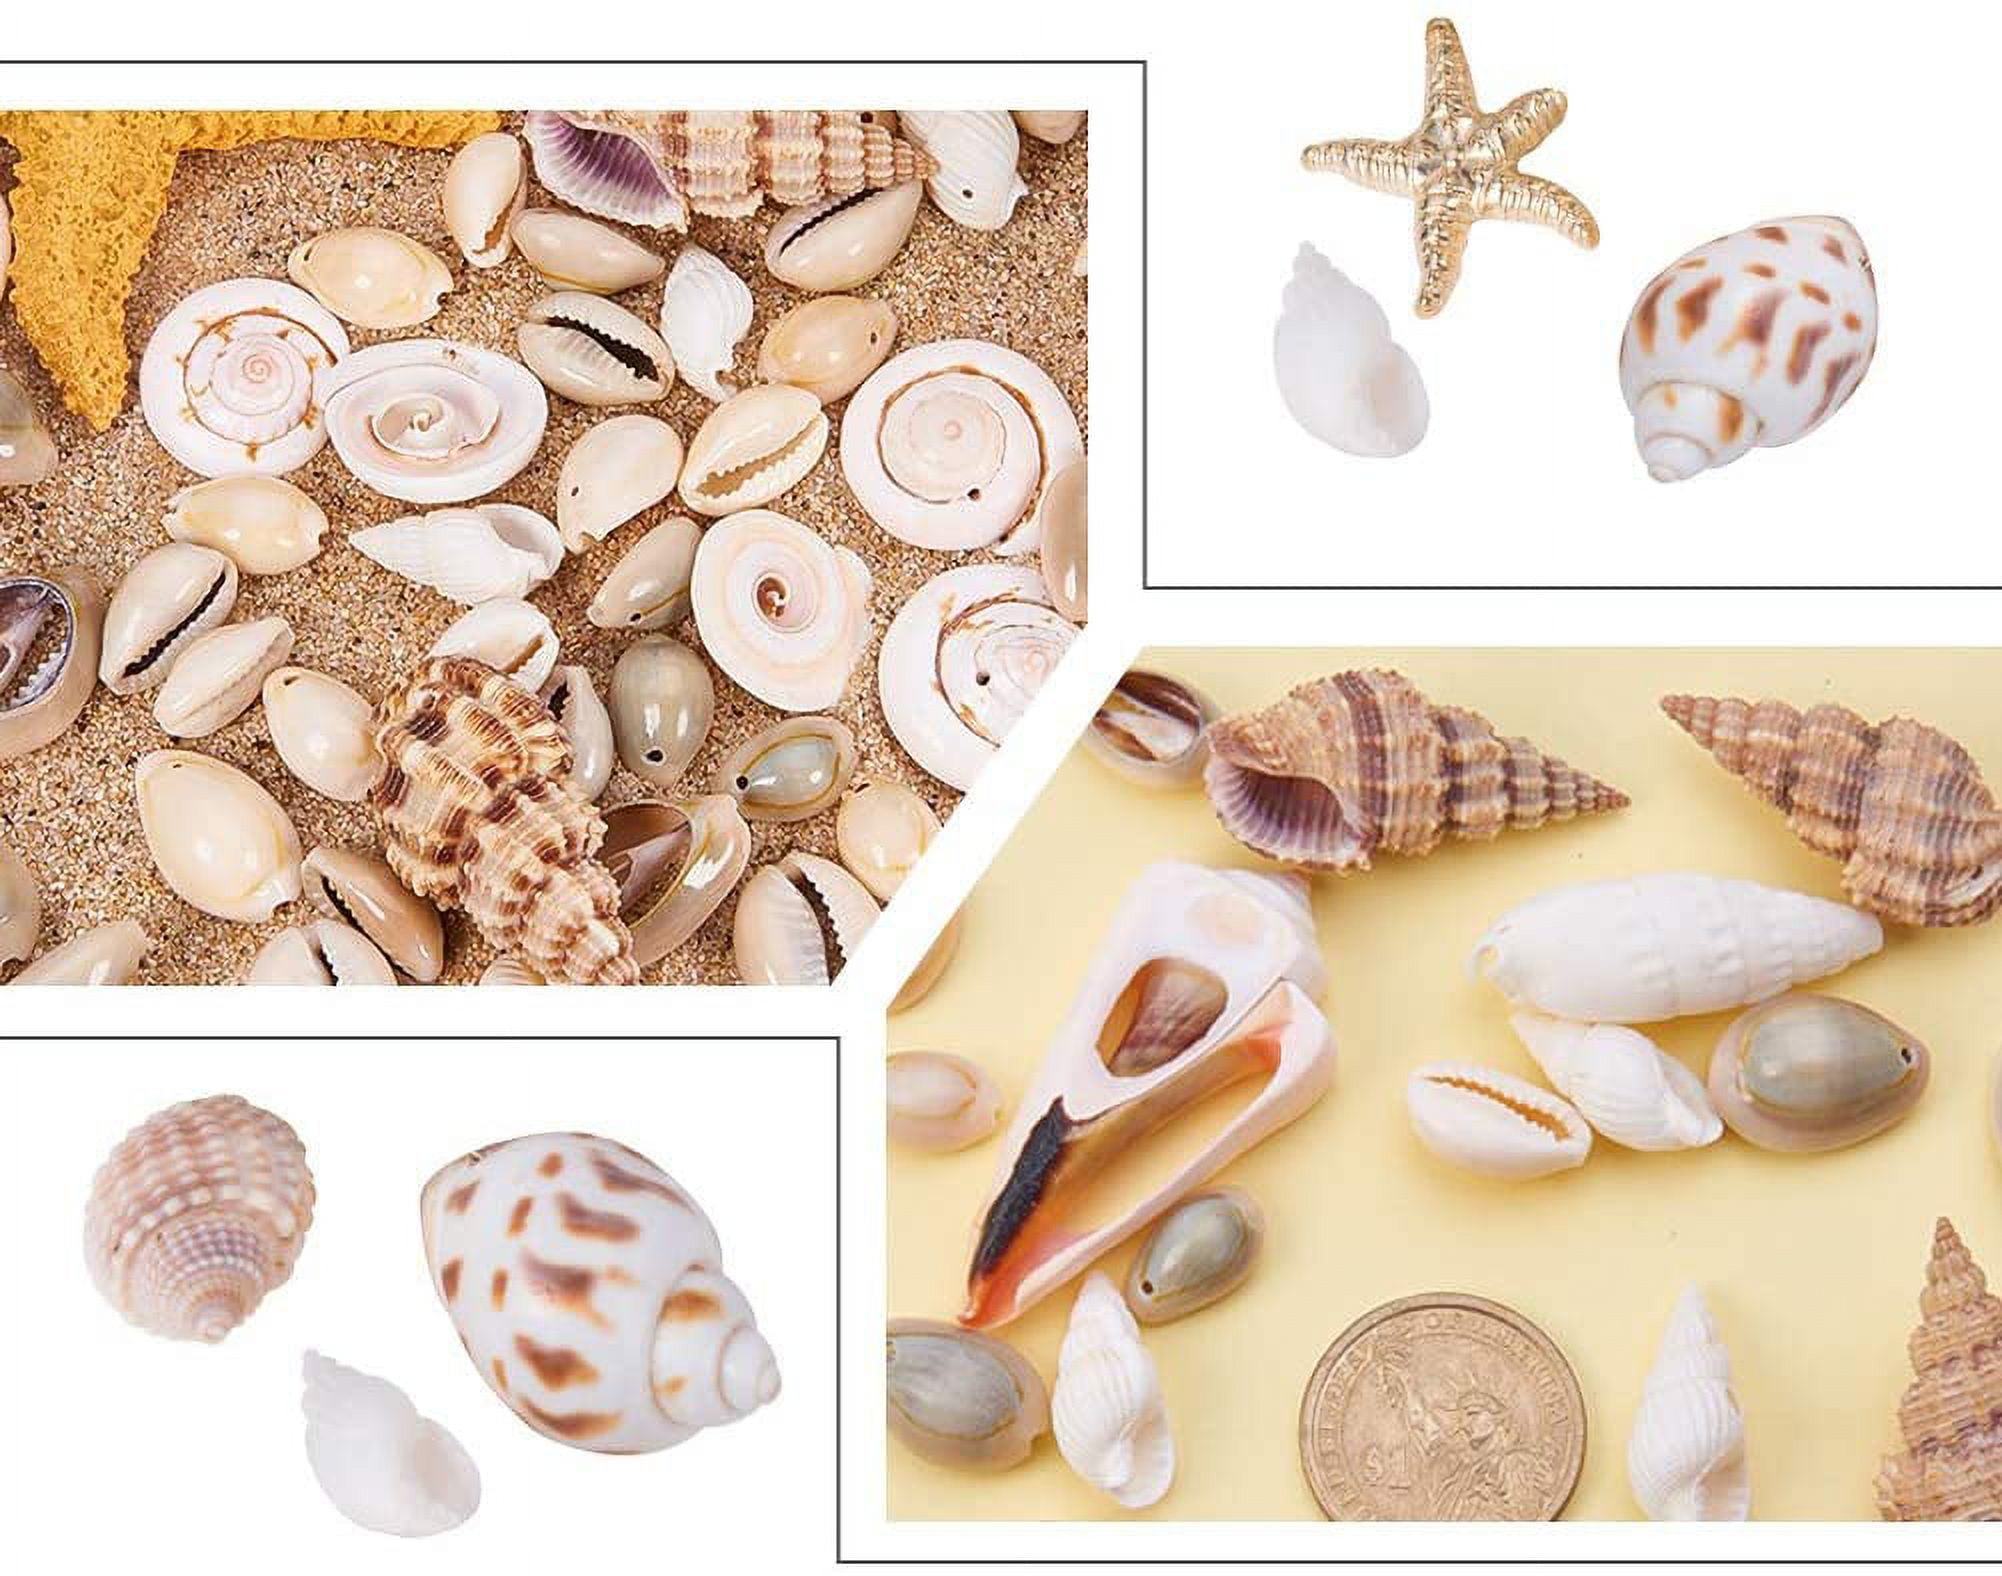 Ocean Beach Spiral Seashells, Natural Craft Seashell Charms Small Conch  Shells for Home Party Wedding Decor Candle Making Fish Tank Vase Filler